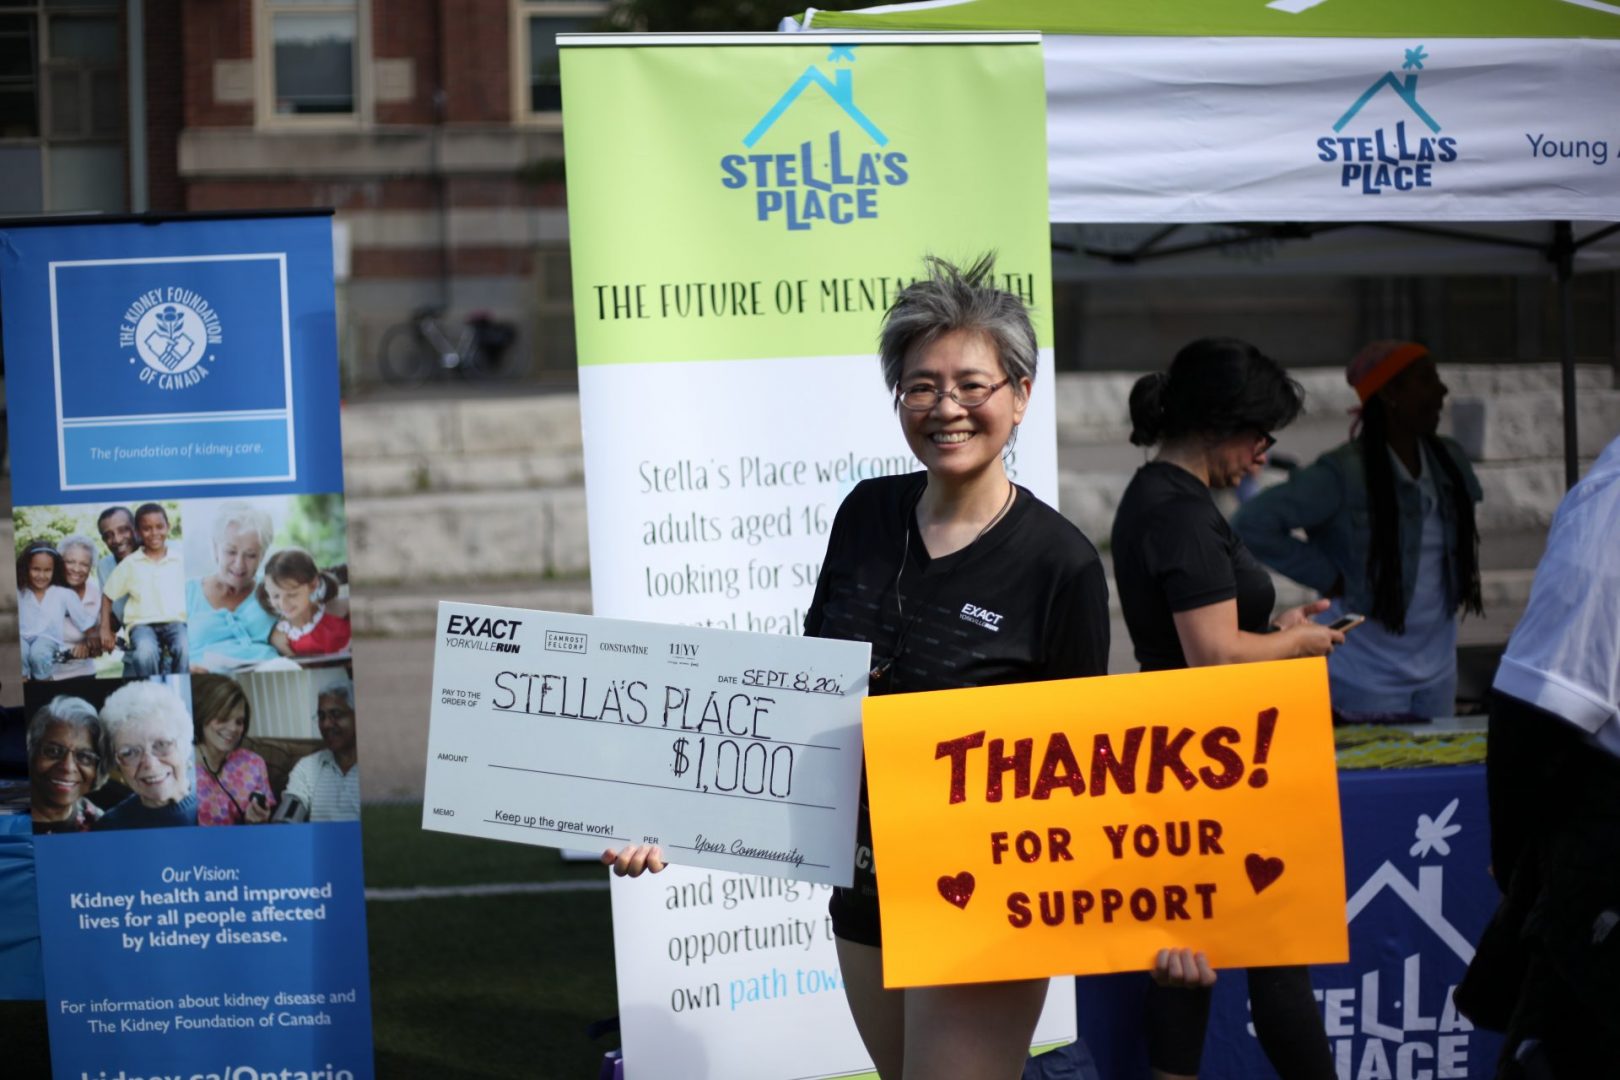 A photo of Stella's Place supporter Nancy Seto holding two signs. The sign on the left is a large cheque poster made out to Stella's Place for $1,000. The poster on the right is an orange sign that says "Thanks for your support" in black.